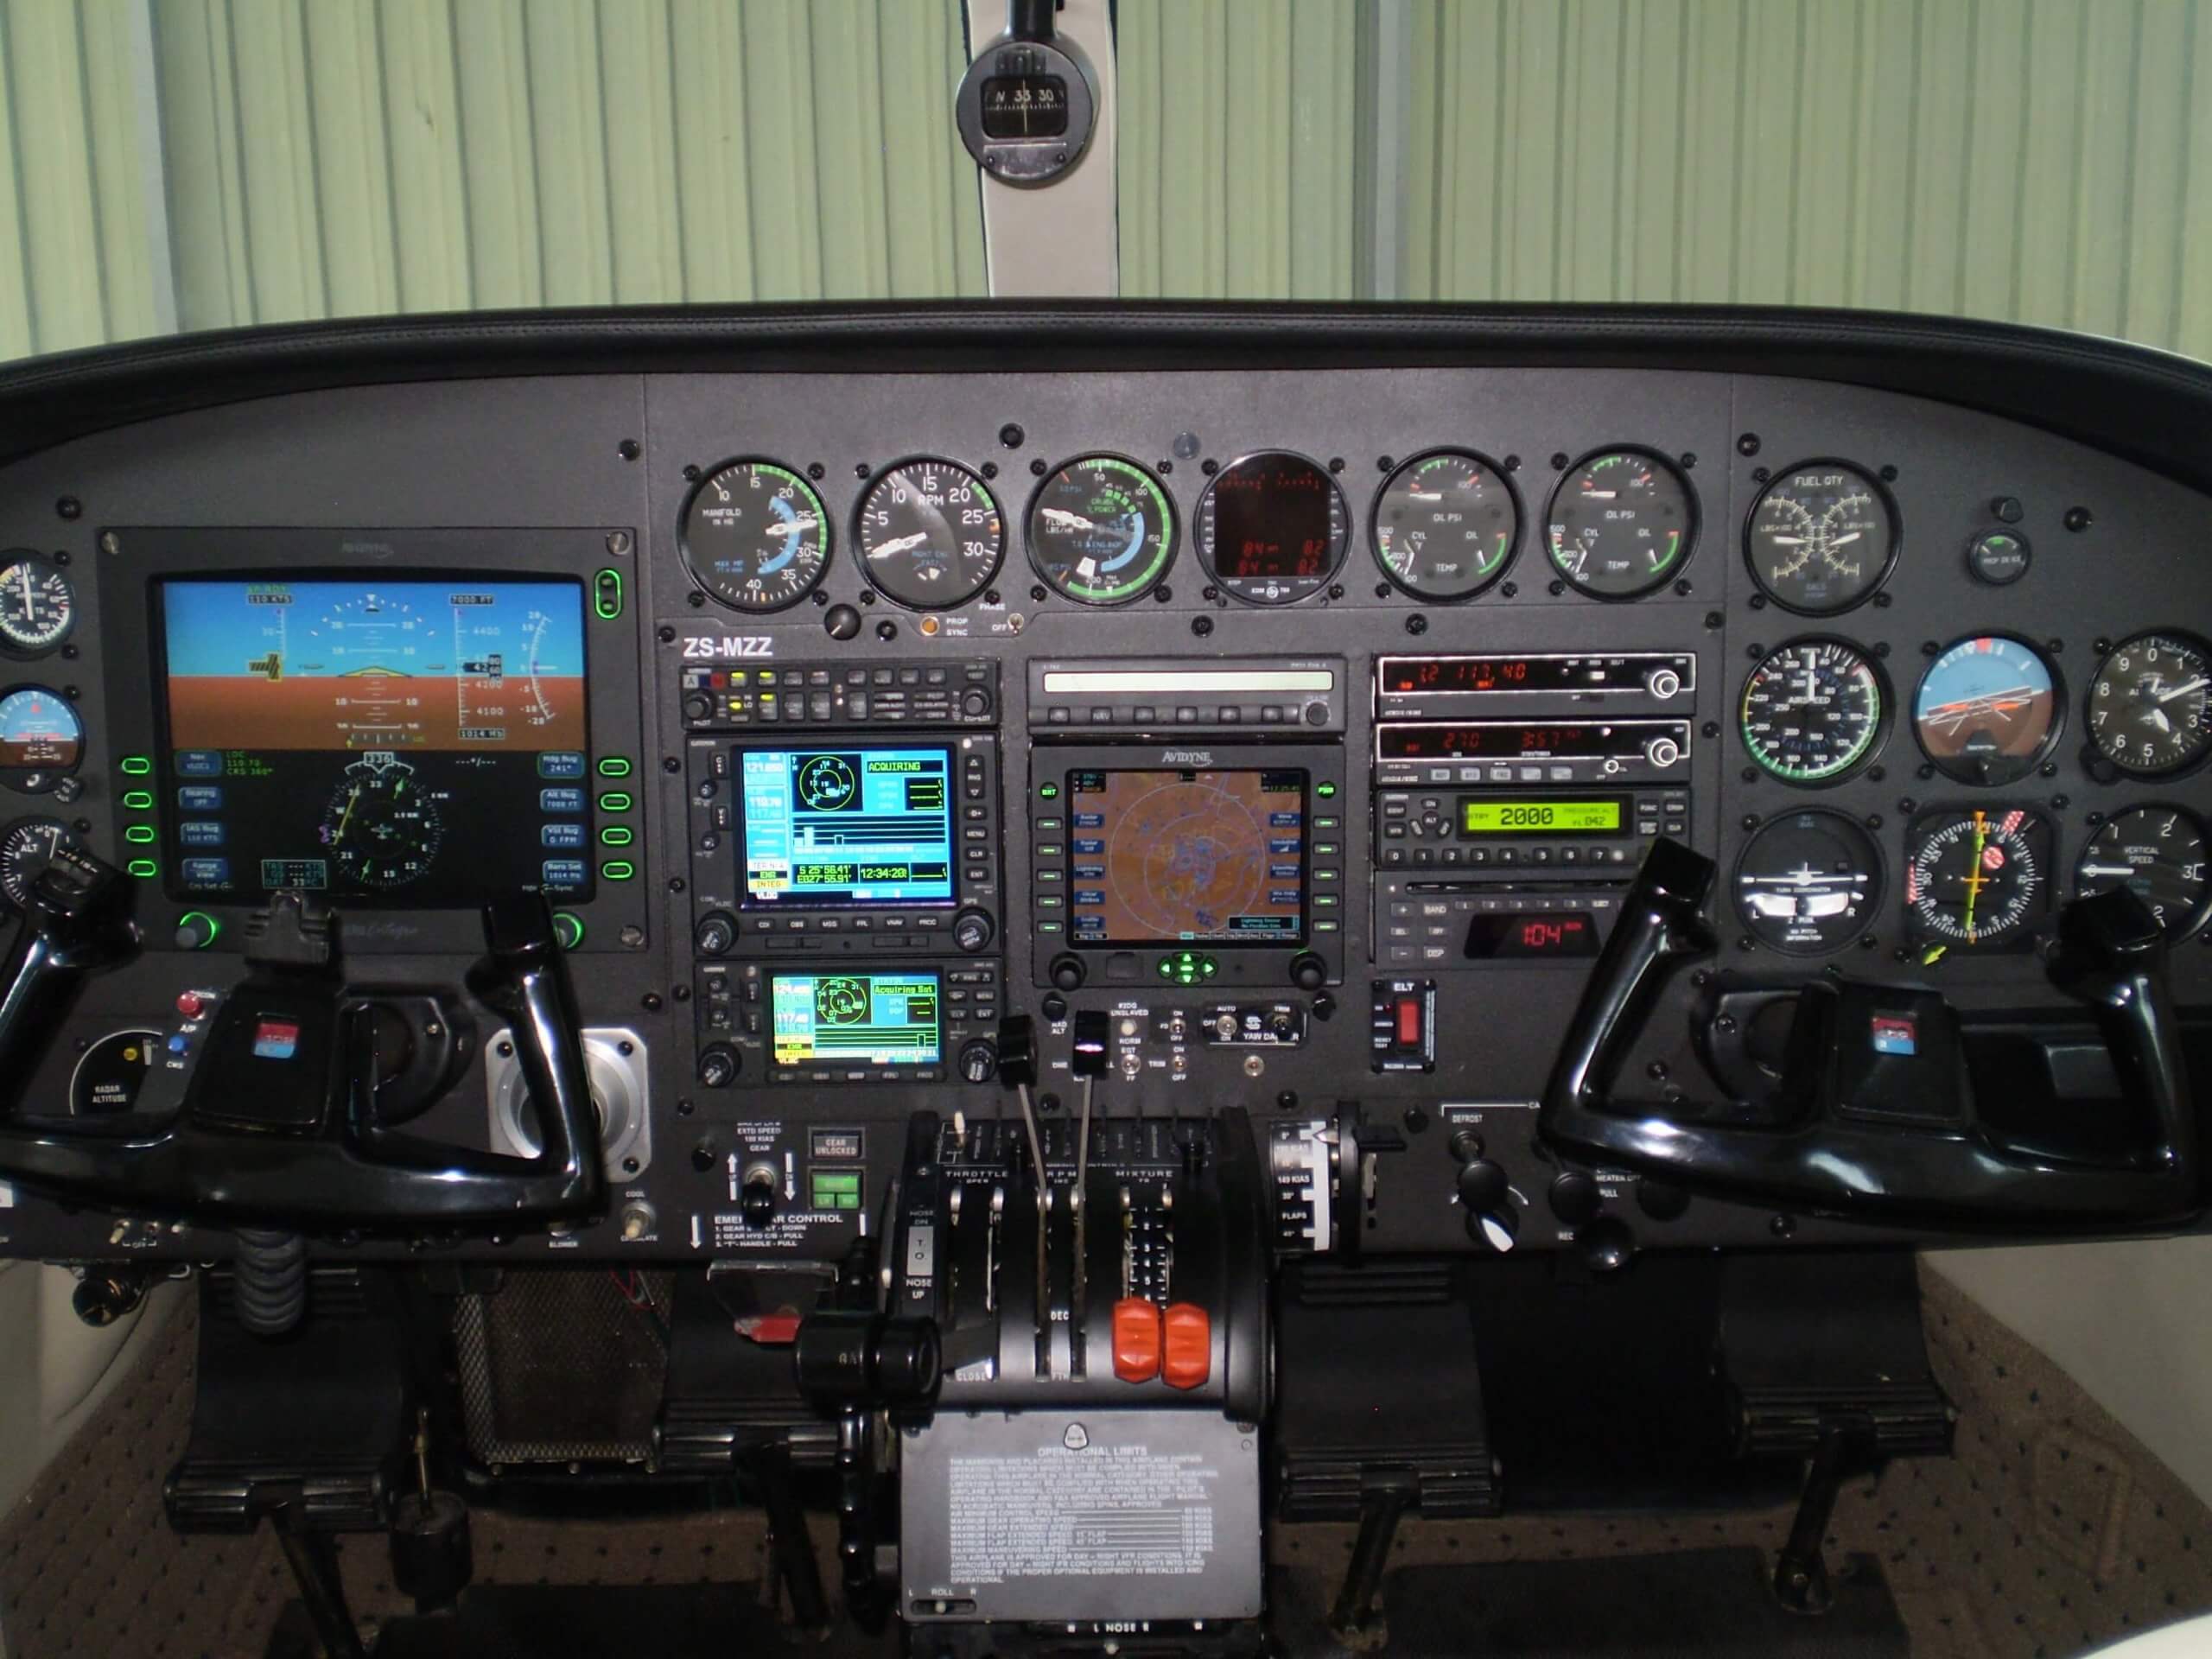 Install an Avidyne PFD, S-TEC System 55x Autopilot with Autotrim and Yaw Damper, Garmin GMA340 Audio Panel, GNS530W, GNS430W, GTX327 Transponder, JPI EDM700 Engine Monitoring System, Avidyne Traffic and Tactical Weather Detection System's and an Avidyne EX600 MFD into a Cessna 402C Business liner.